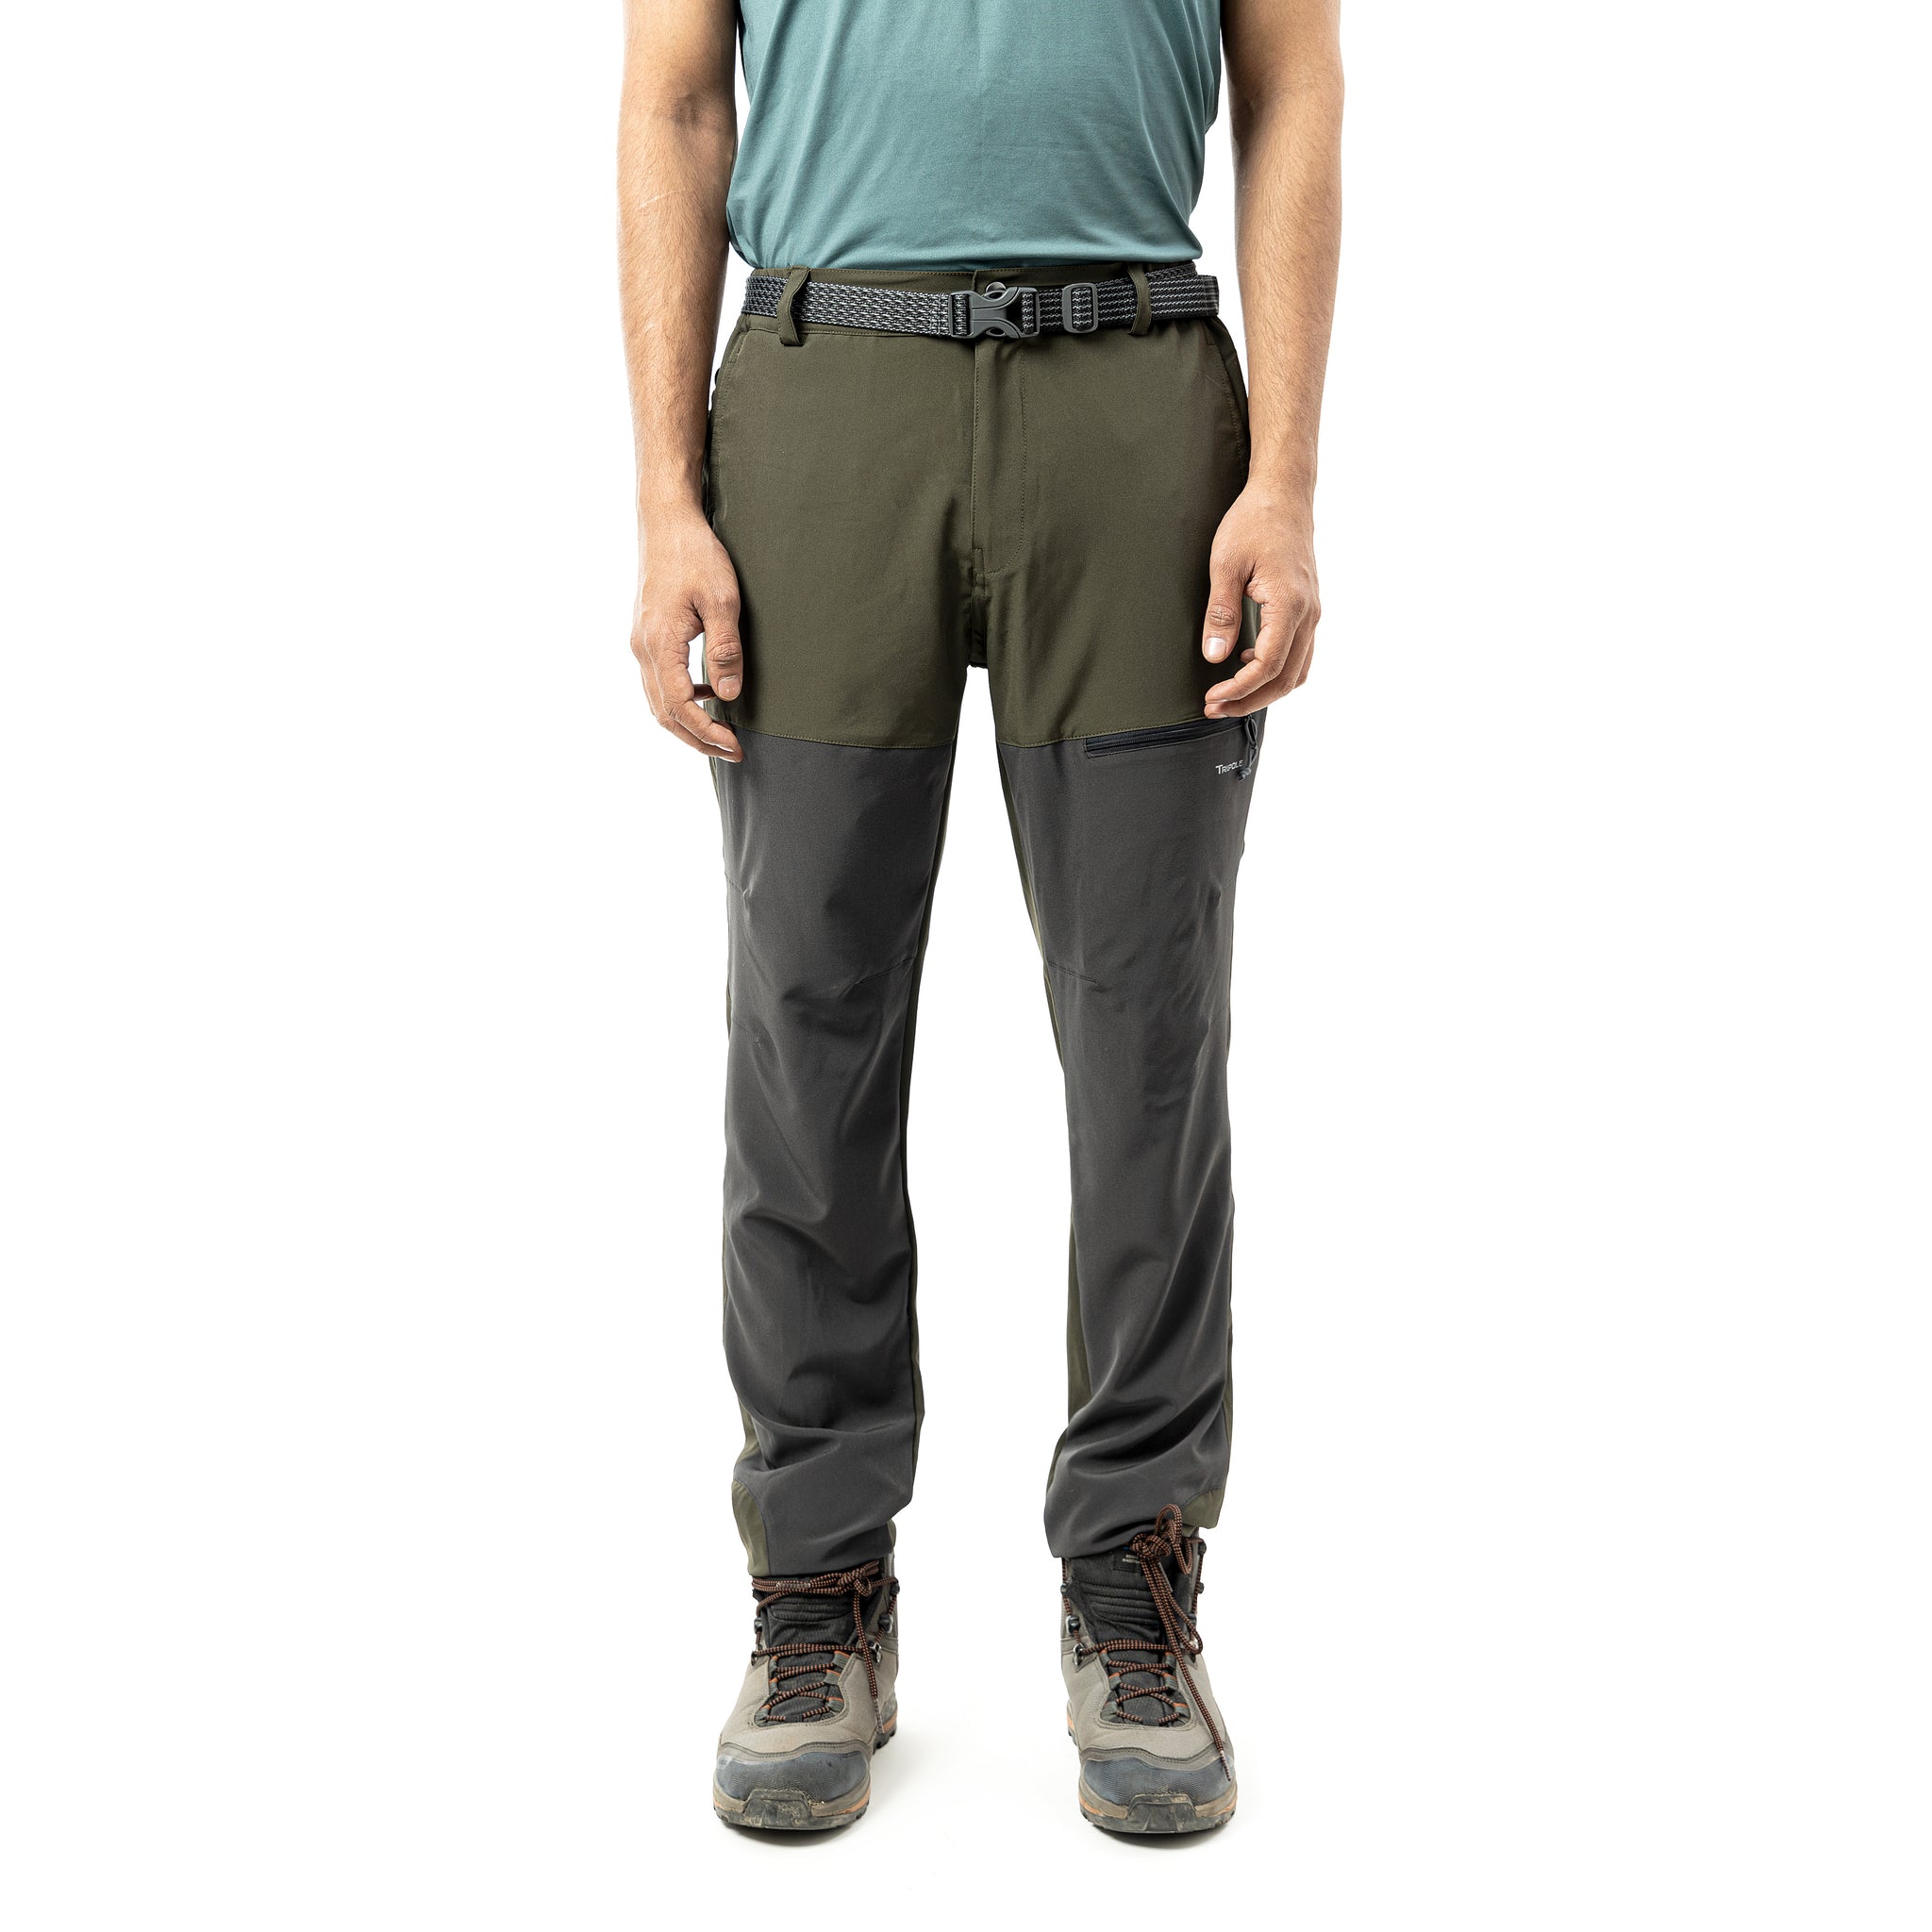 Mens Trekking and Hiking Pants and Trousers l Green  Grey  Tripole Gears